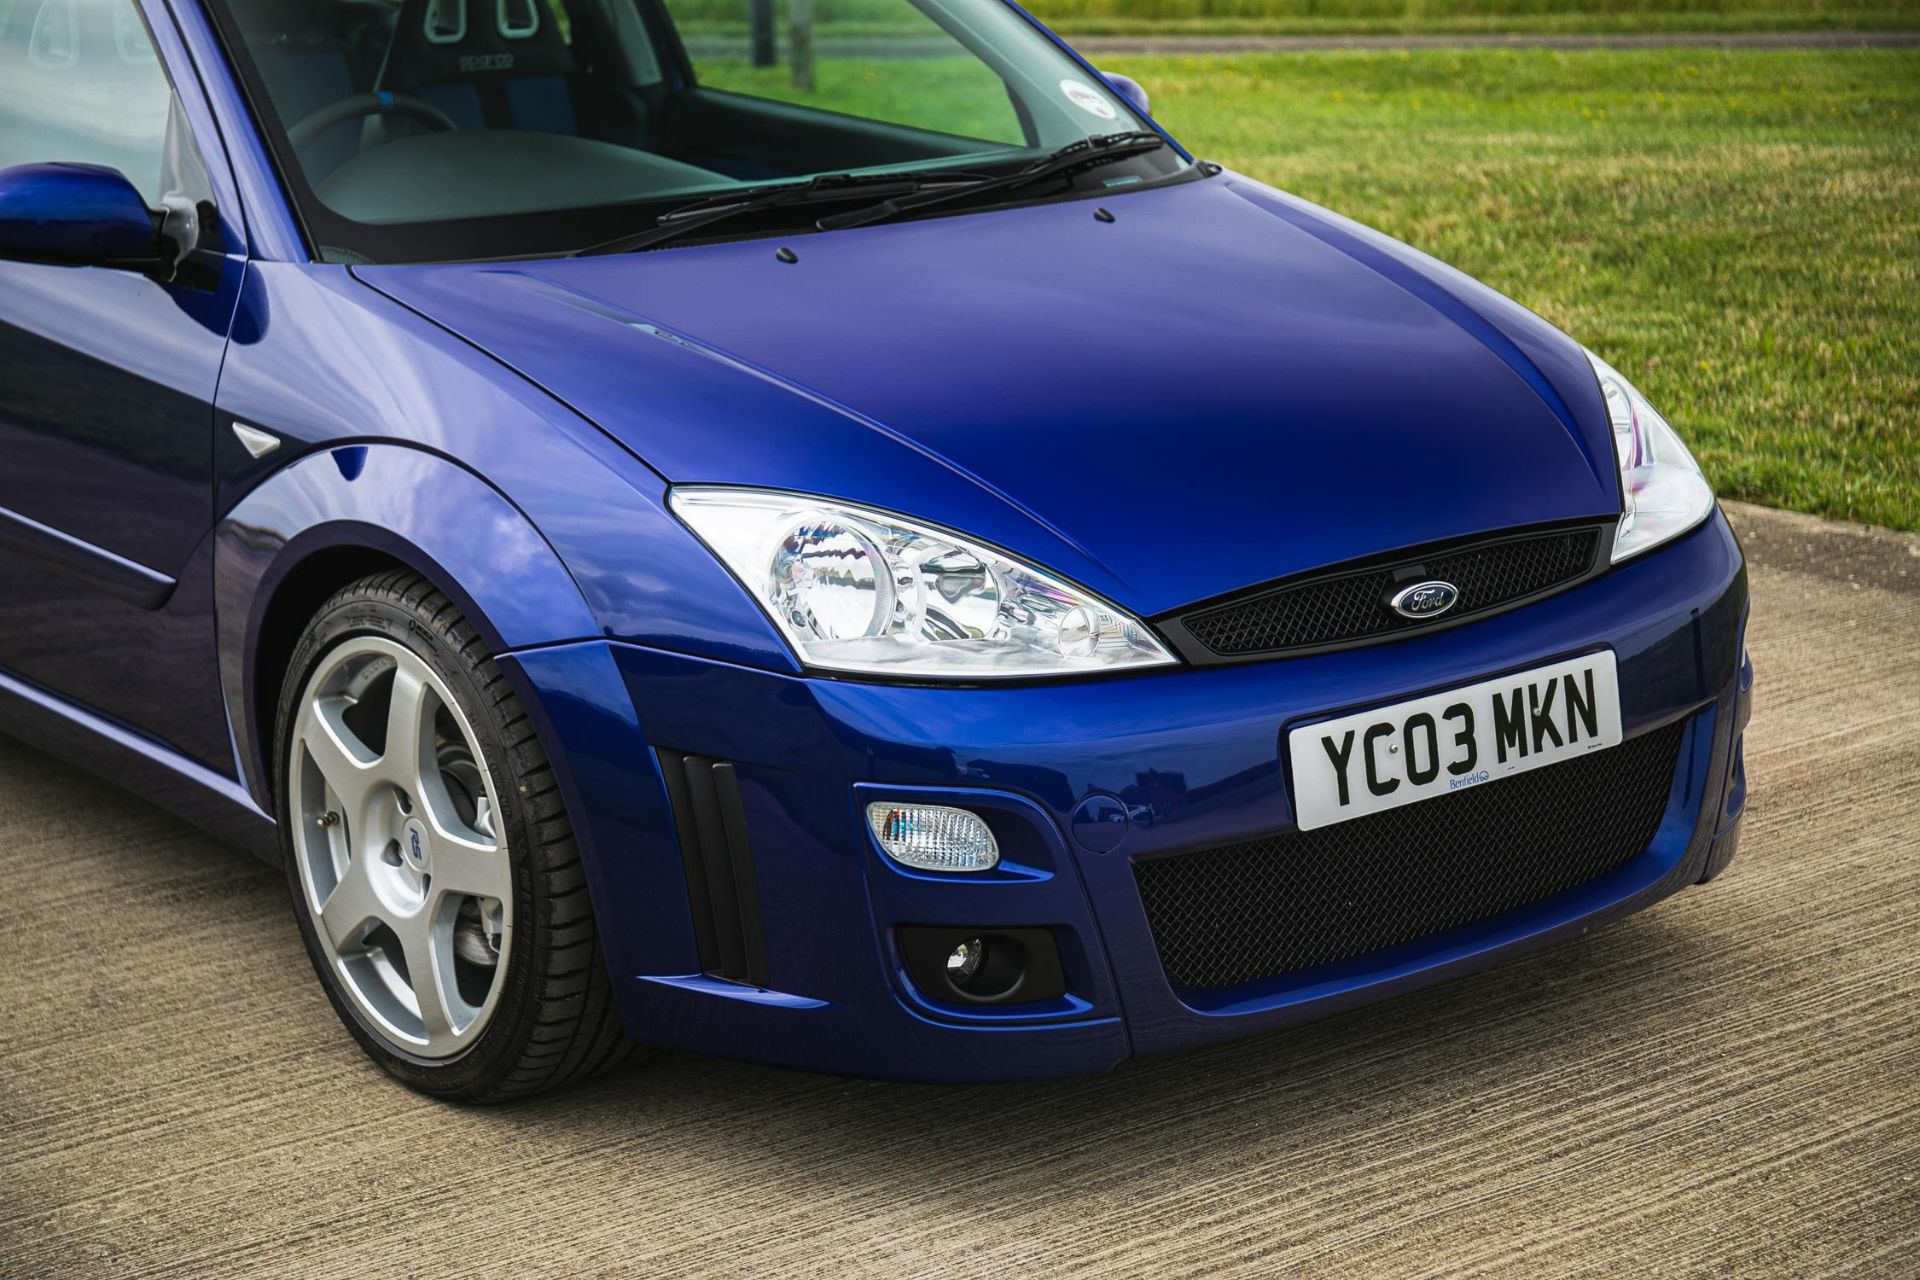 2003 Ford Focus RS Mk1 - Image 8 of 10